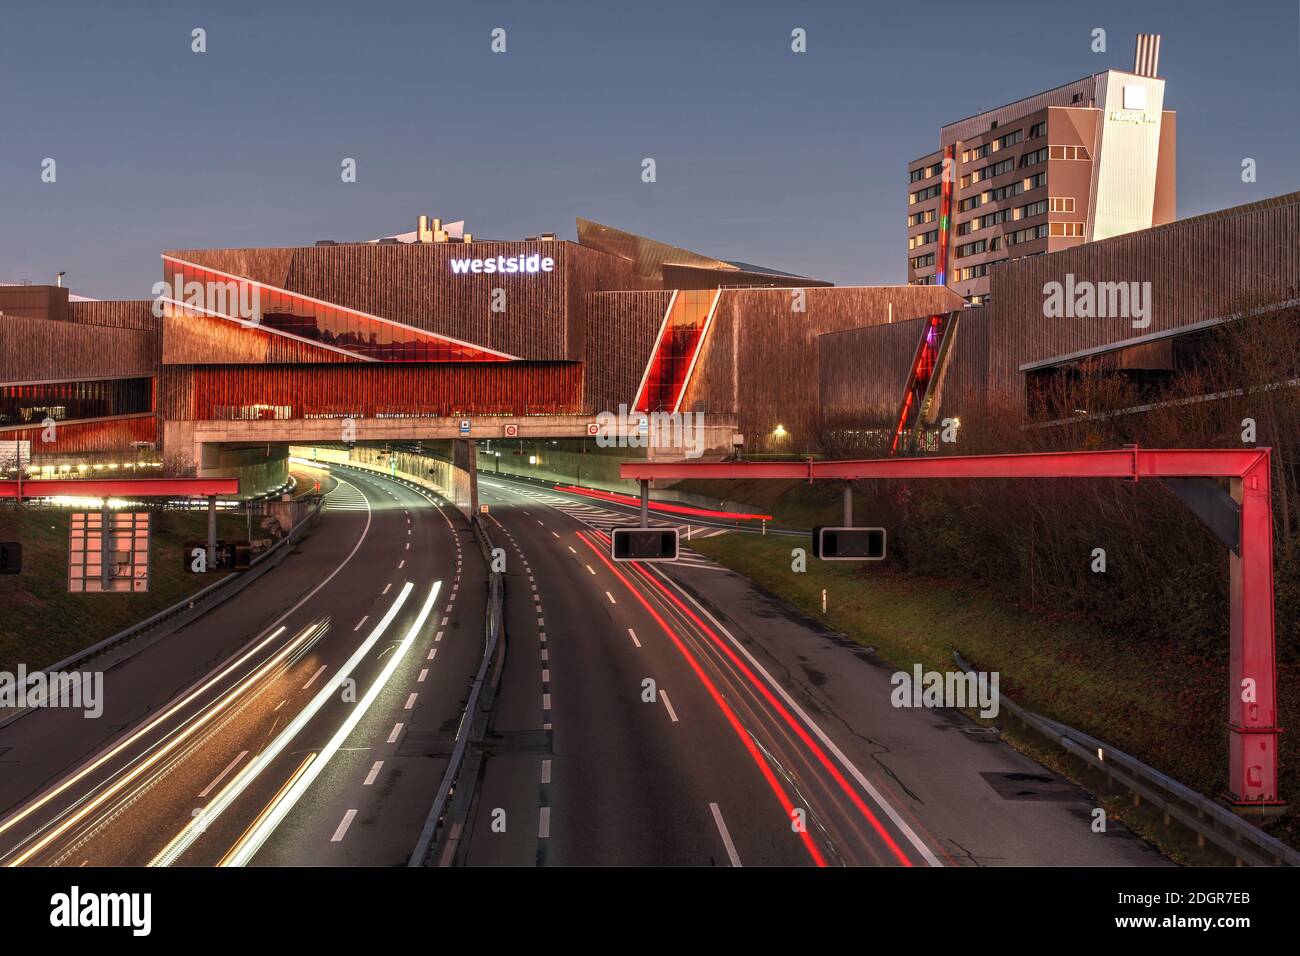 Bern, Switzerland - November 21, 2020 - Westside Shopping and Leisure Centre at night with traffic on A1 motorway going under the development before e Stock Photo